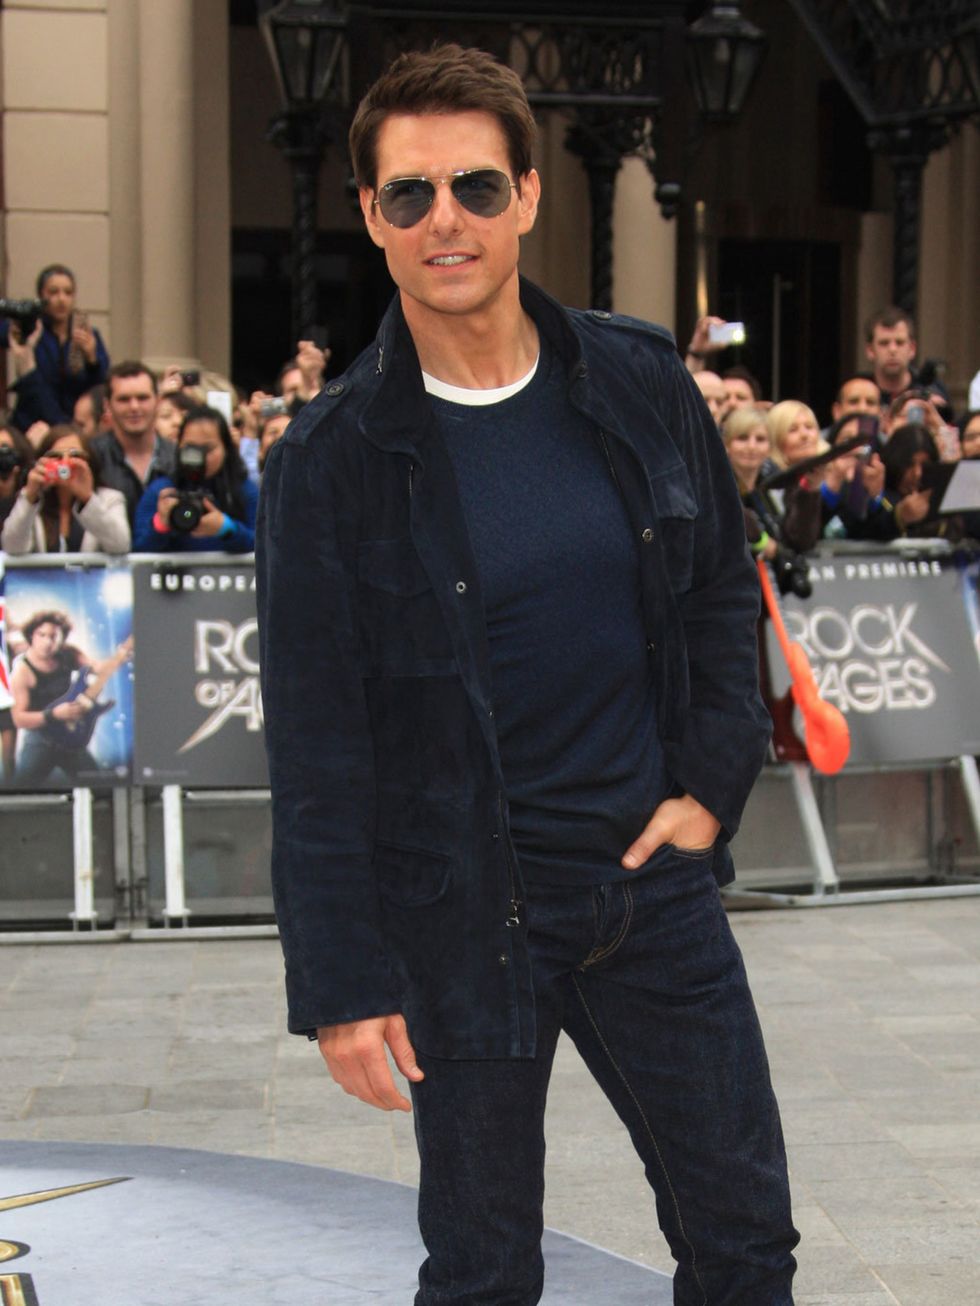 <p>Tom Cruise at the European Premiere of Rock Of Ages in London, in which he plays a rock star named Stacee Jaxx. He revealed the script for Top Gun 2 is currently in development and wore a jacket by Holmes and Yang  designed by his wife, Katie Holmes.<